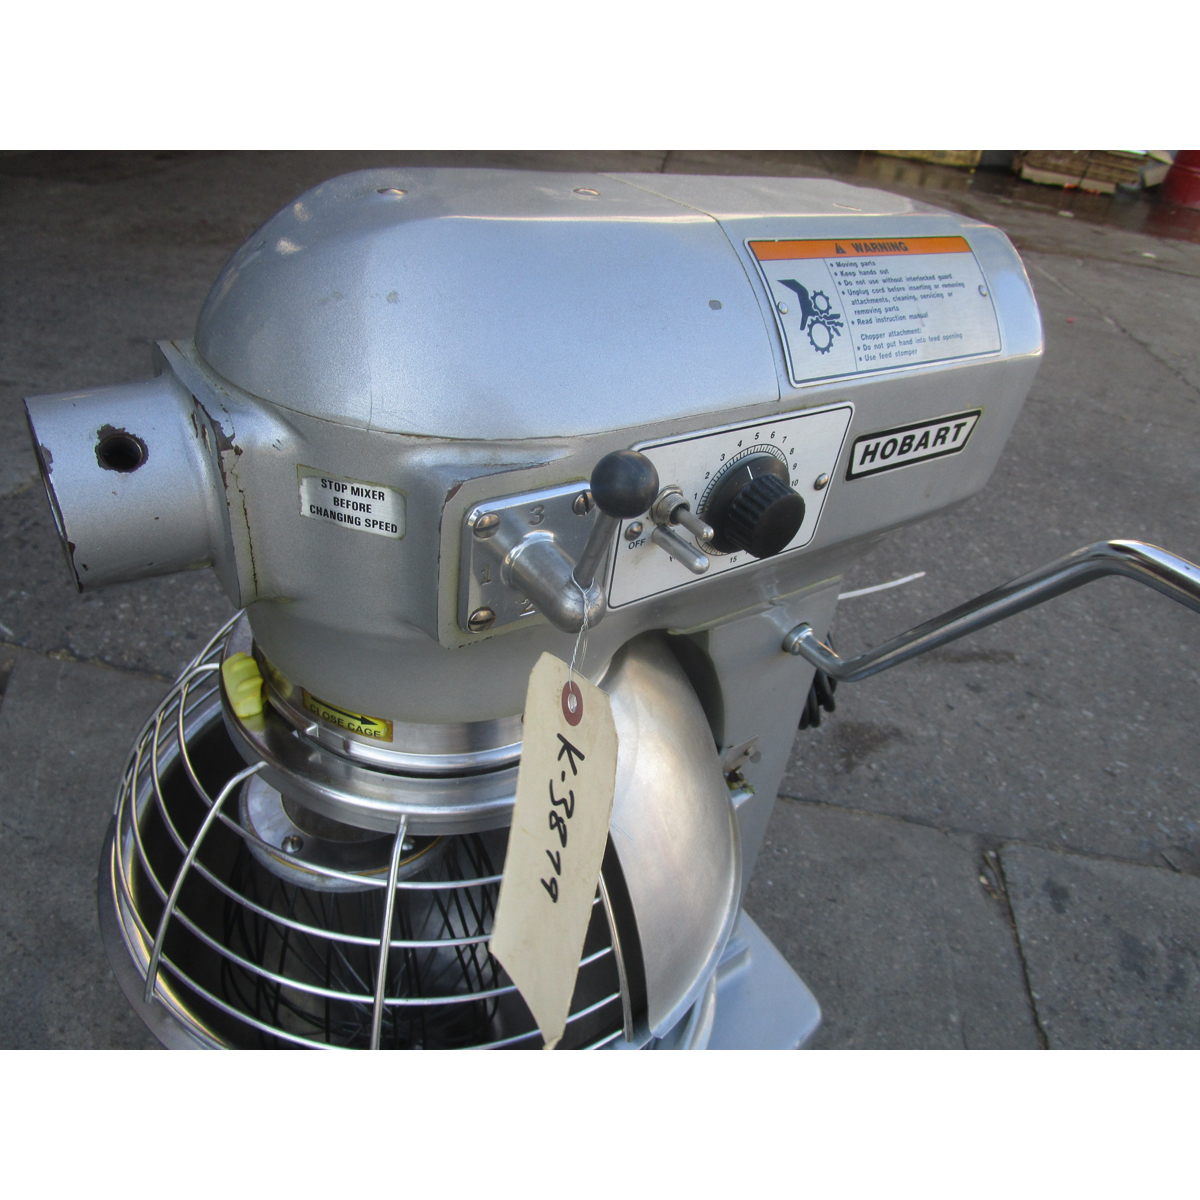 Hobart 20 Quart A200 Mixer With Bowl Guard, Used Great Condition image 3